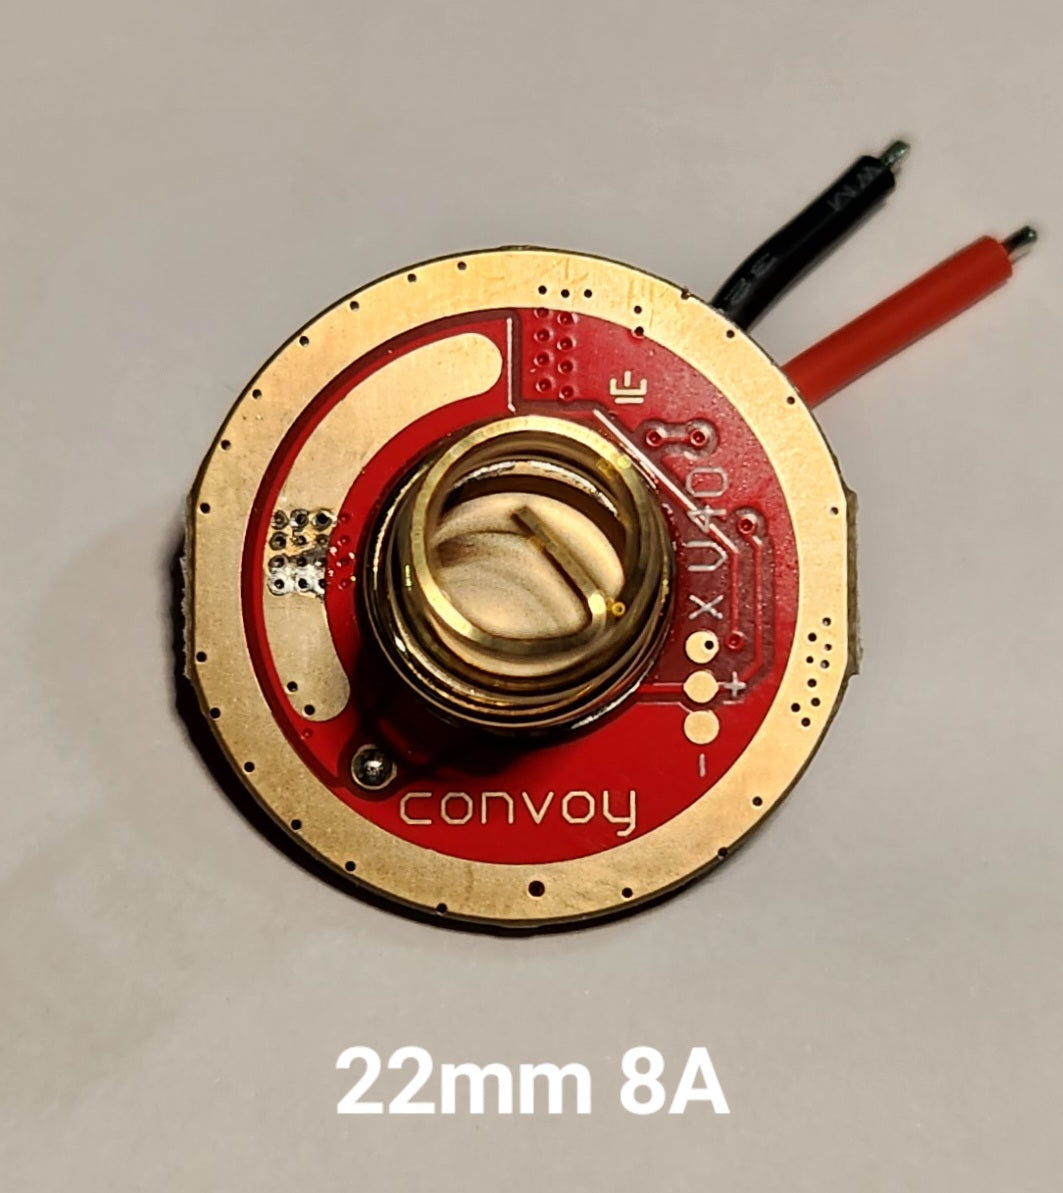 Convoy 22mm LED Driver for SST40 12 groups 6000mA